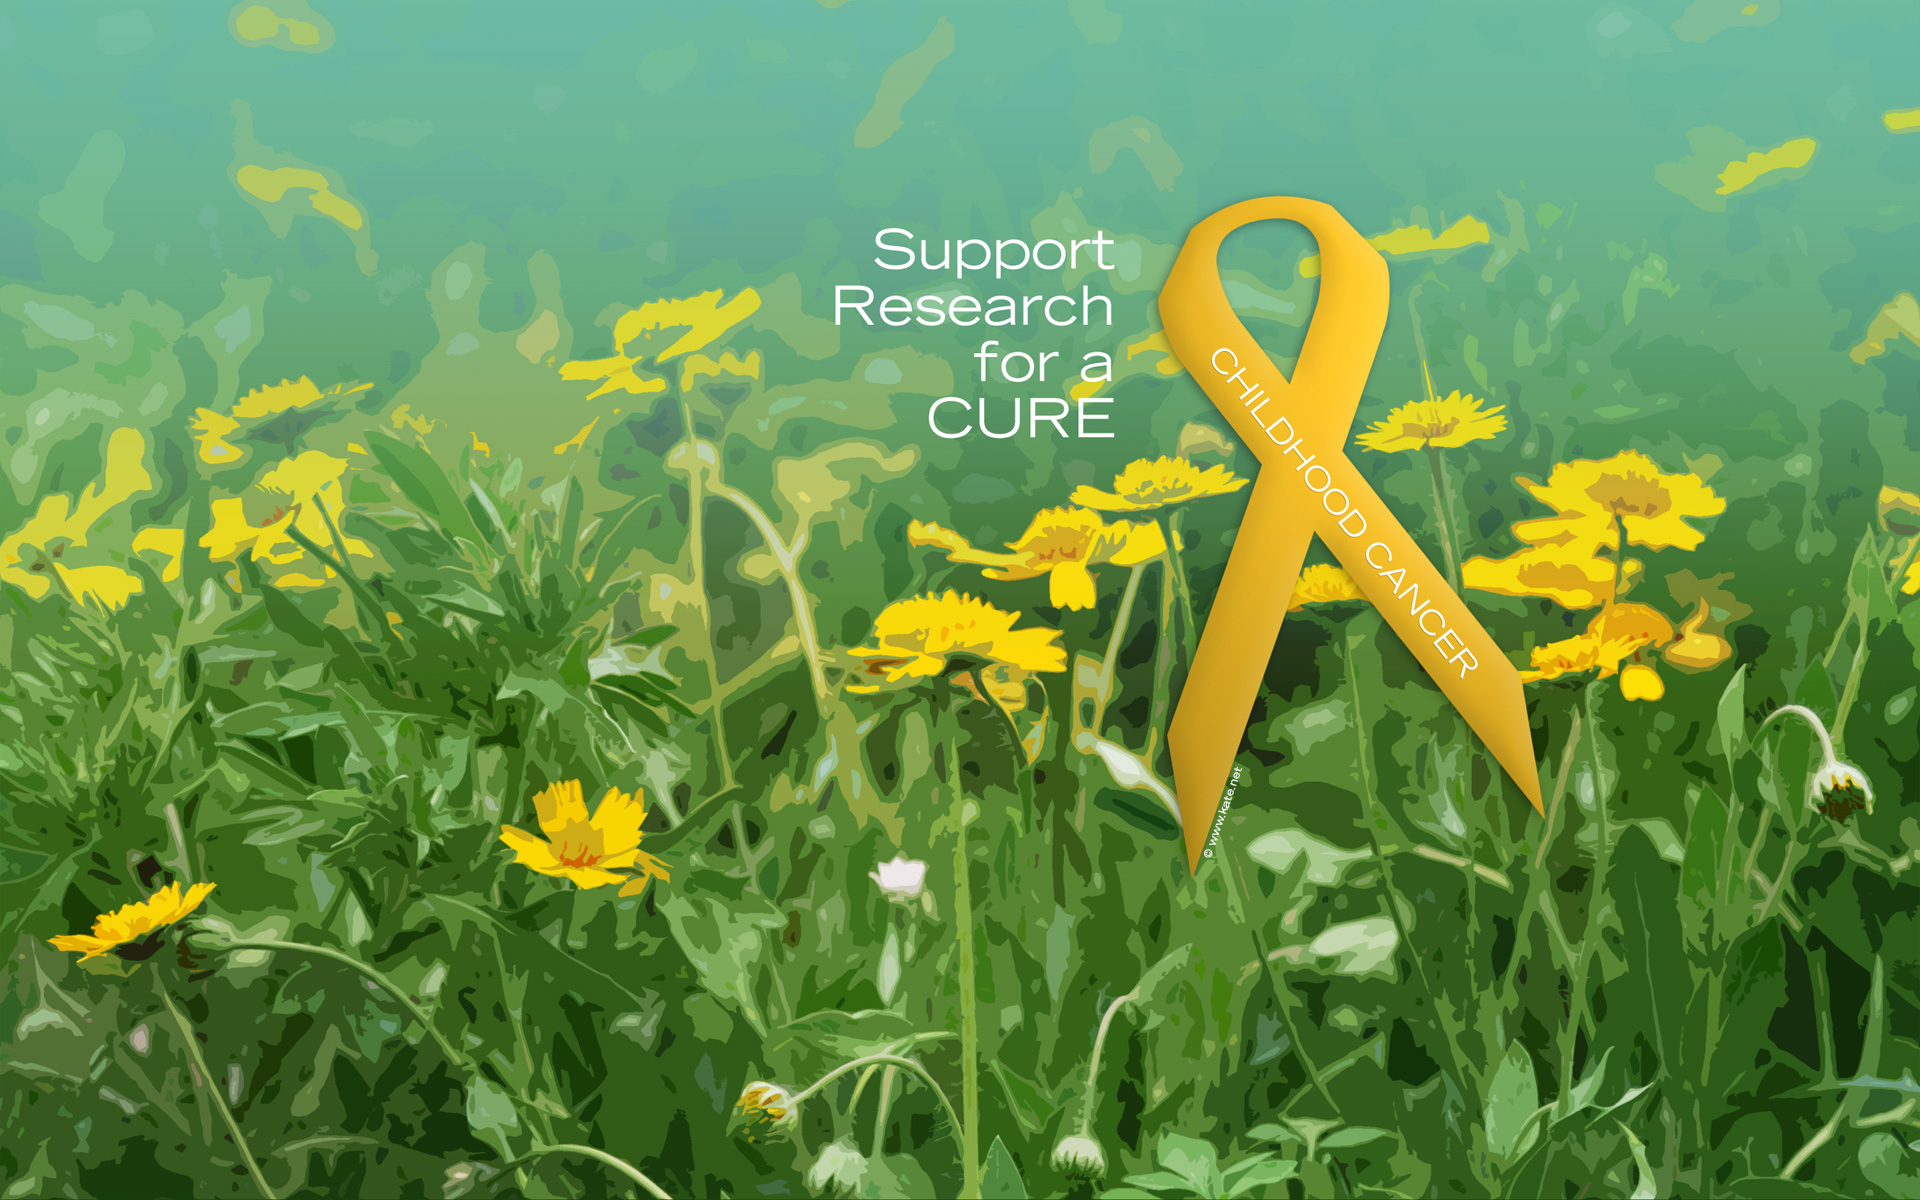 Childhood Cancer Awareness Wallpapers on Kate.net